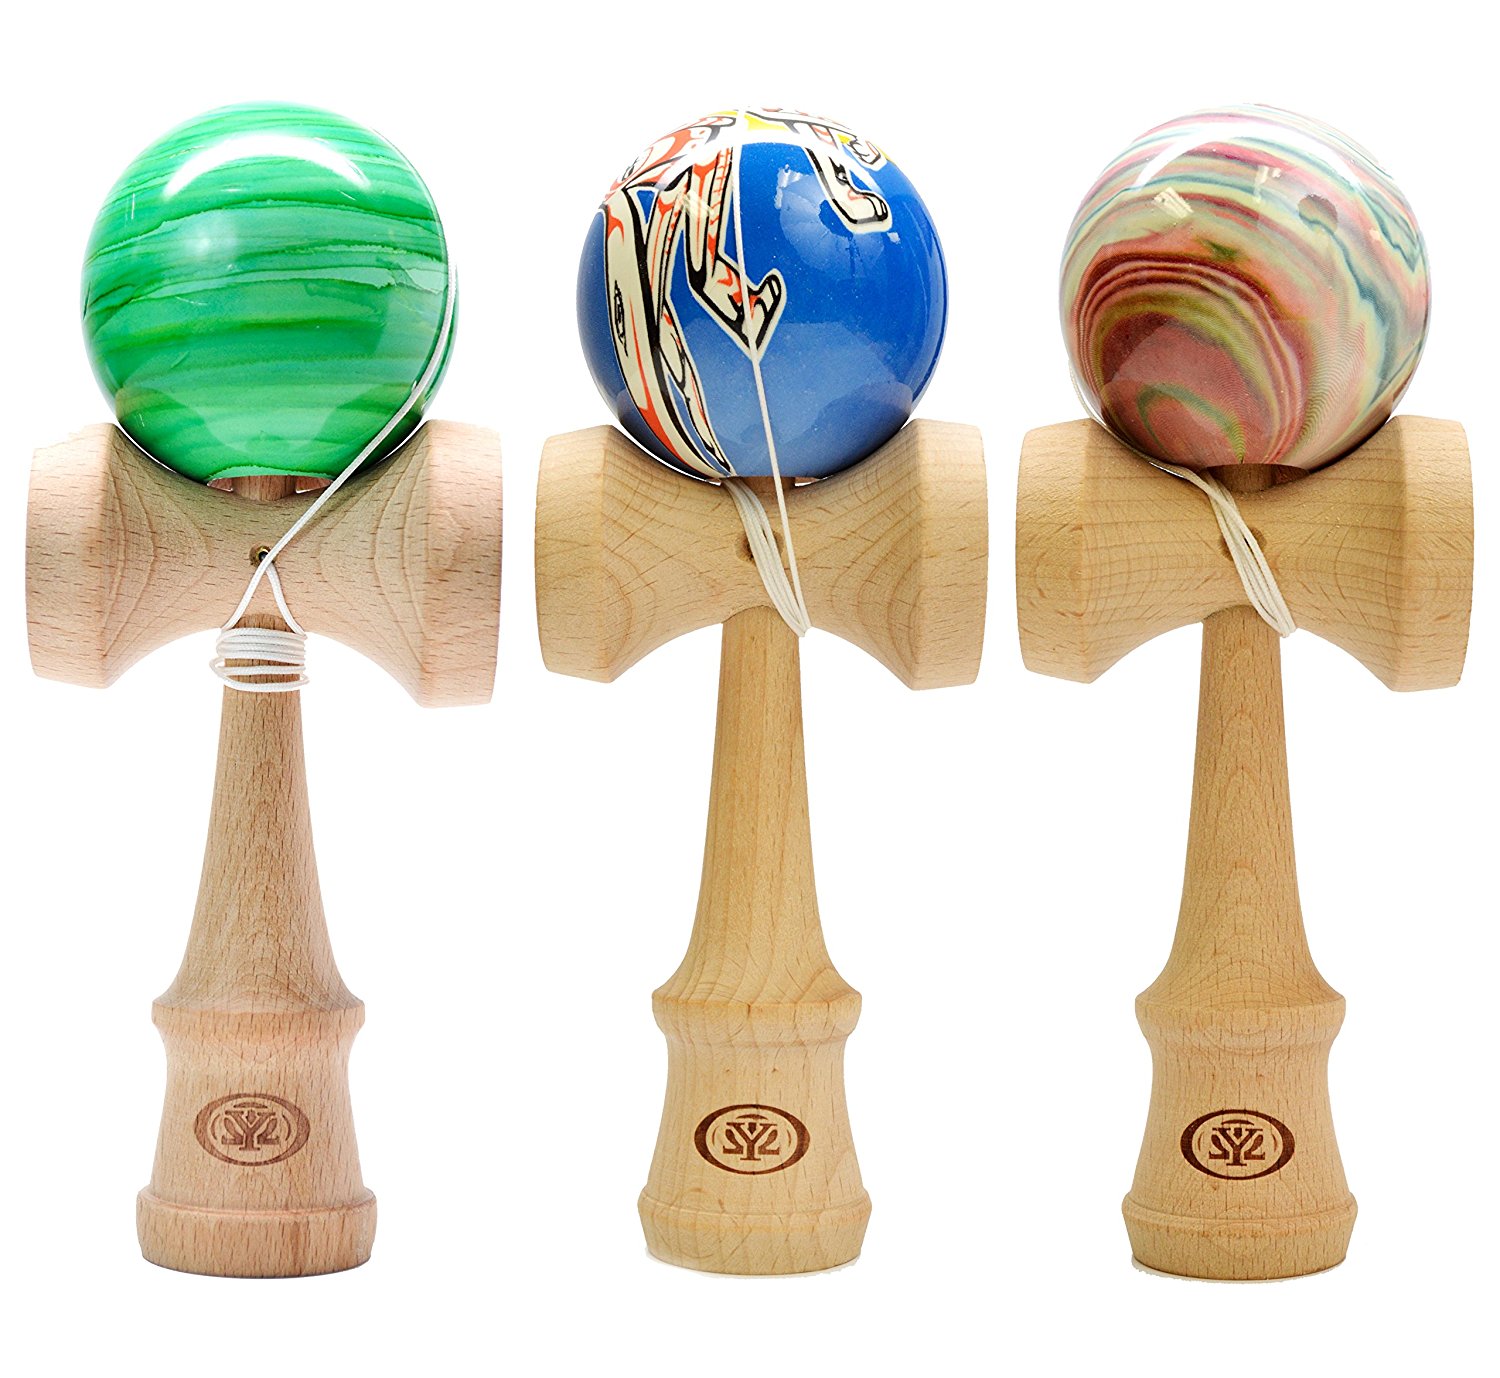 Fischer Walnut Pro model wooden toy with cord and ball skill game for outdoor and indoors Original Krom Pro Kendama made of wood for beginners and advanced users